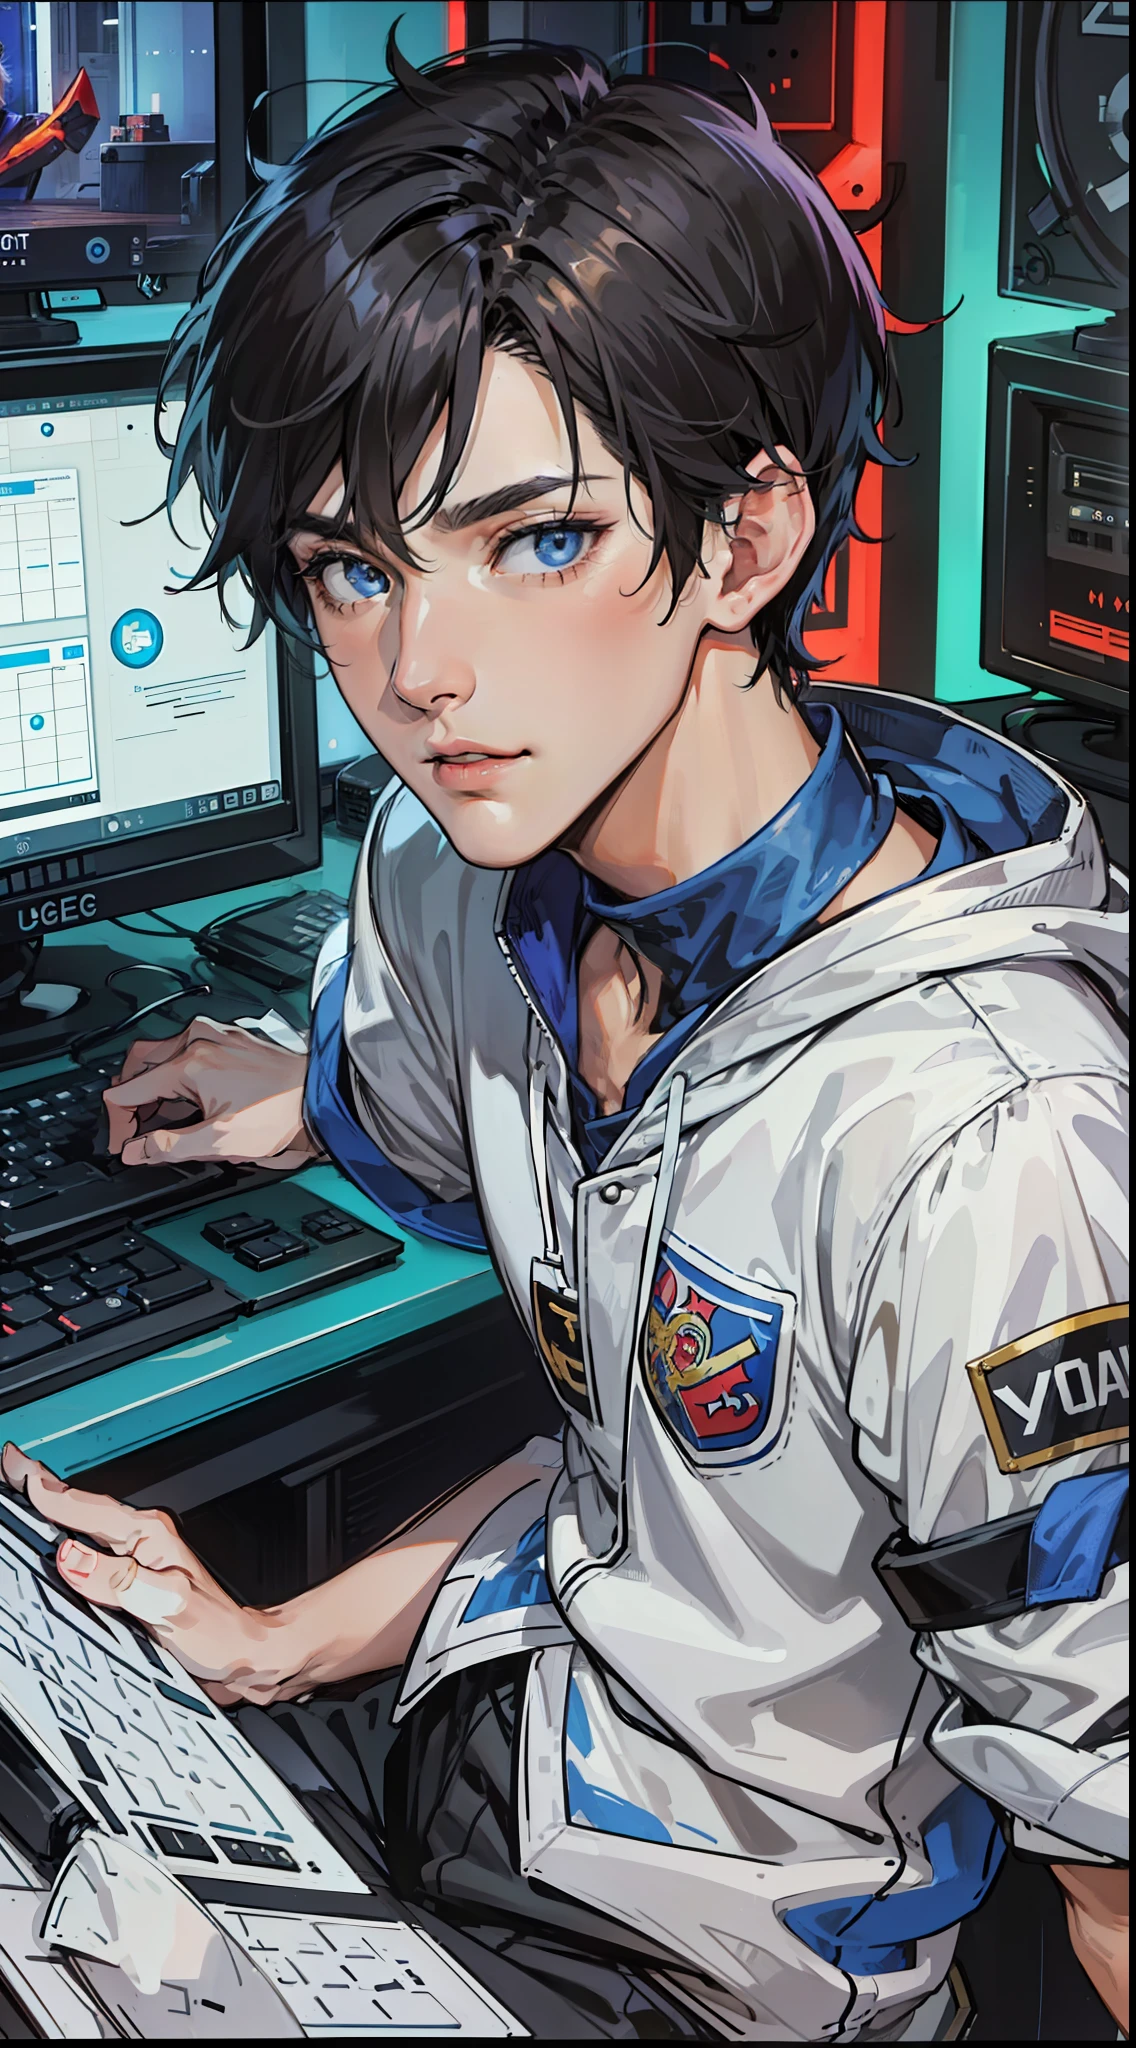 Best quality: 1.0), (Super High Resolution: 1.0), Anime boy, short black hair, blue eyes, sitting in front of computer playing games, background in esports room,